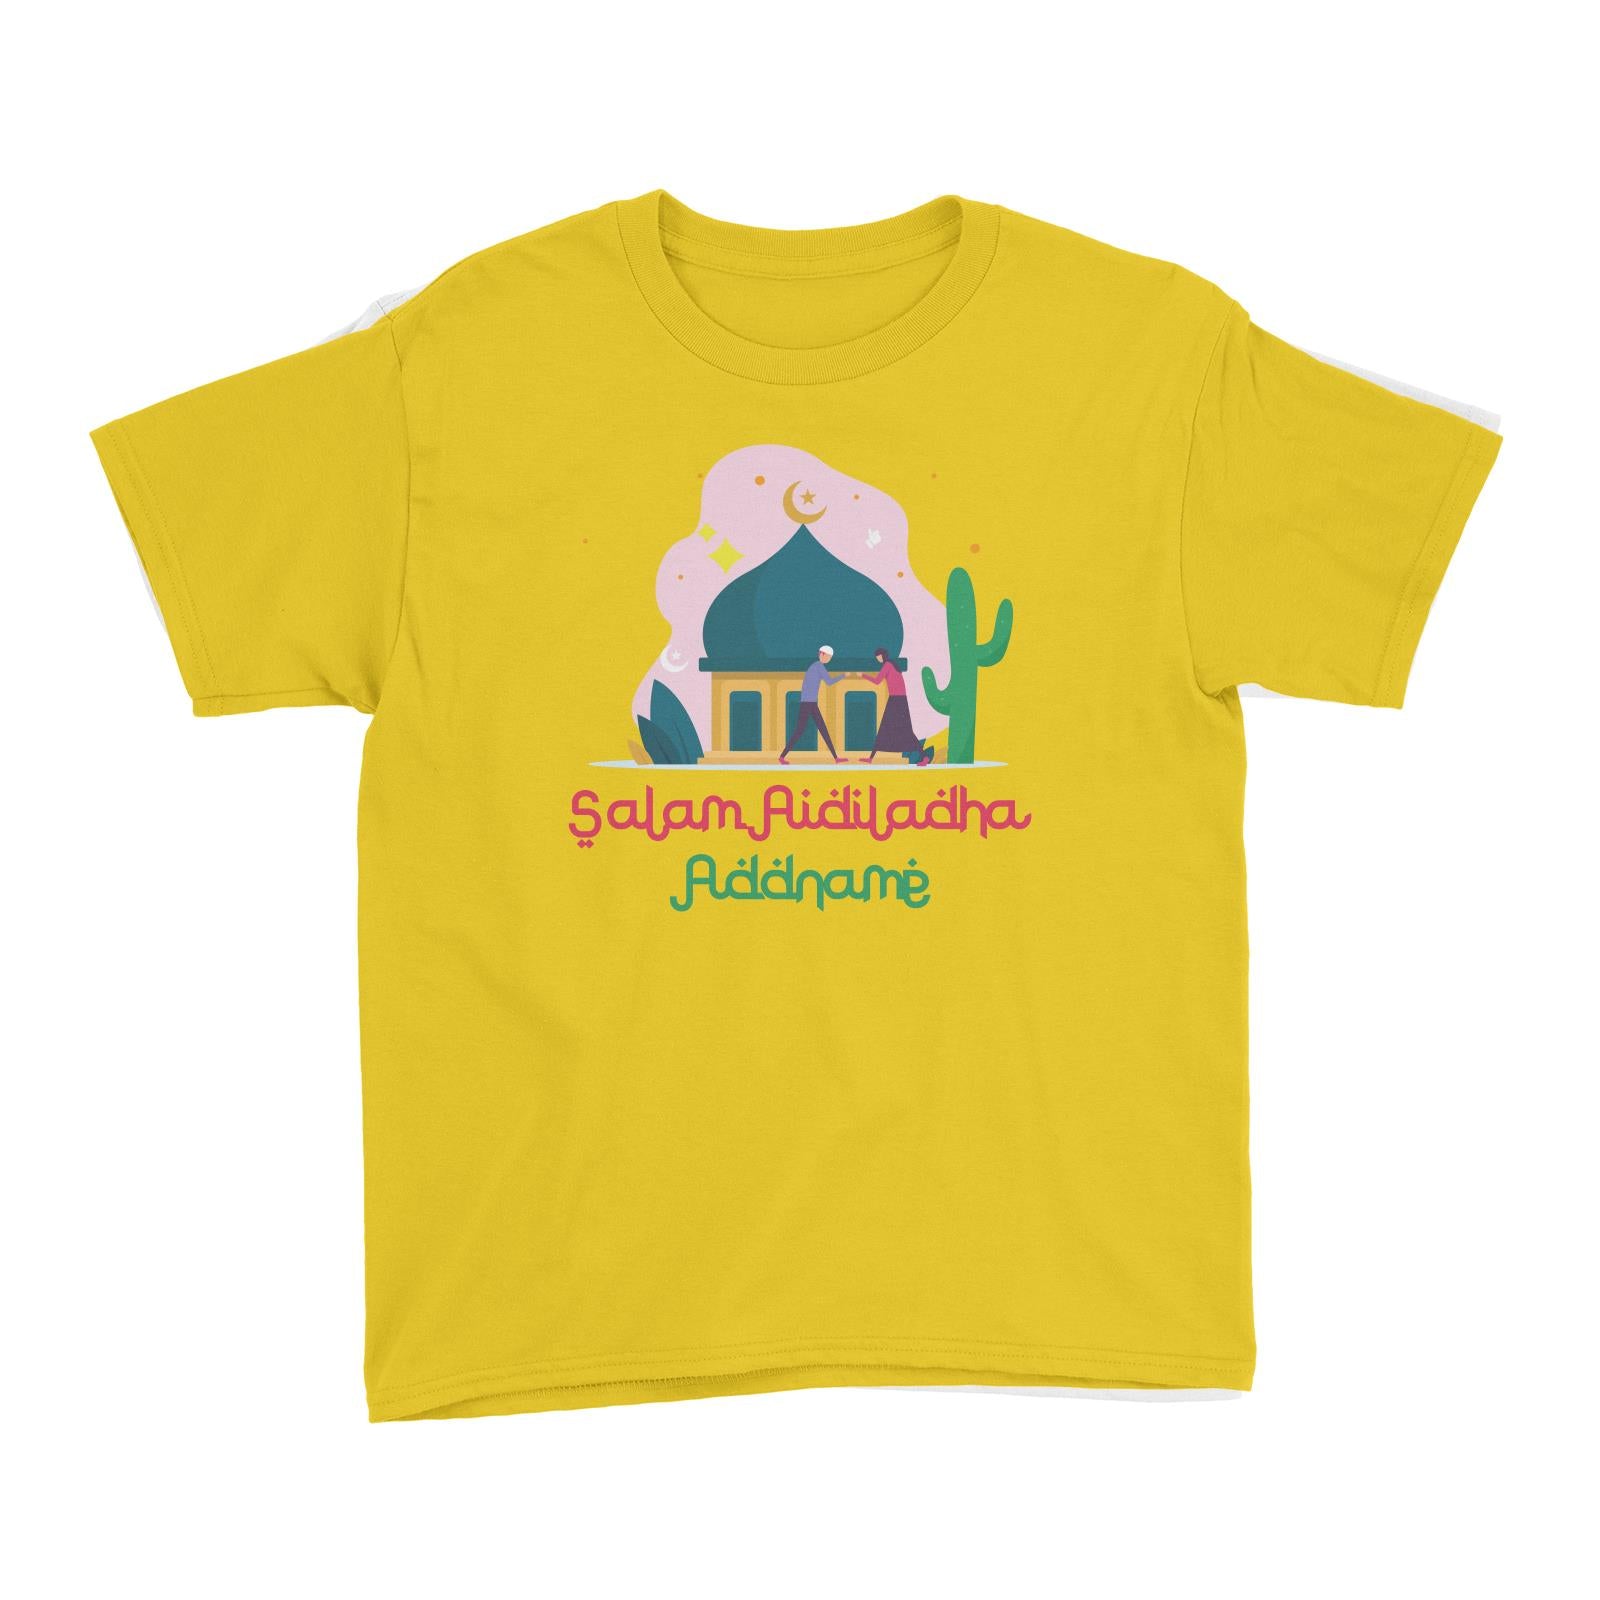 Aidiladha Sibling at Mosque Addname Kid's T-Shirt